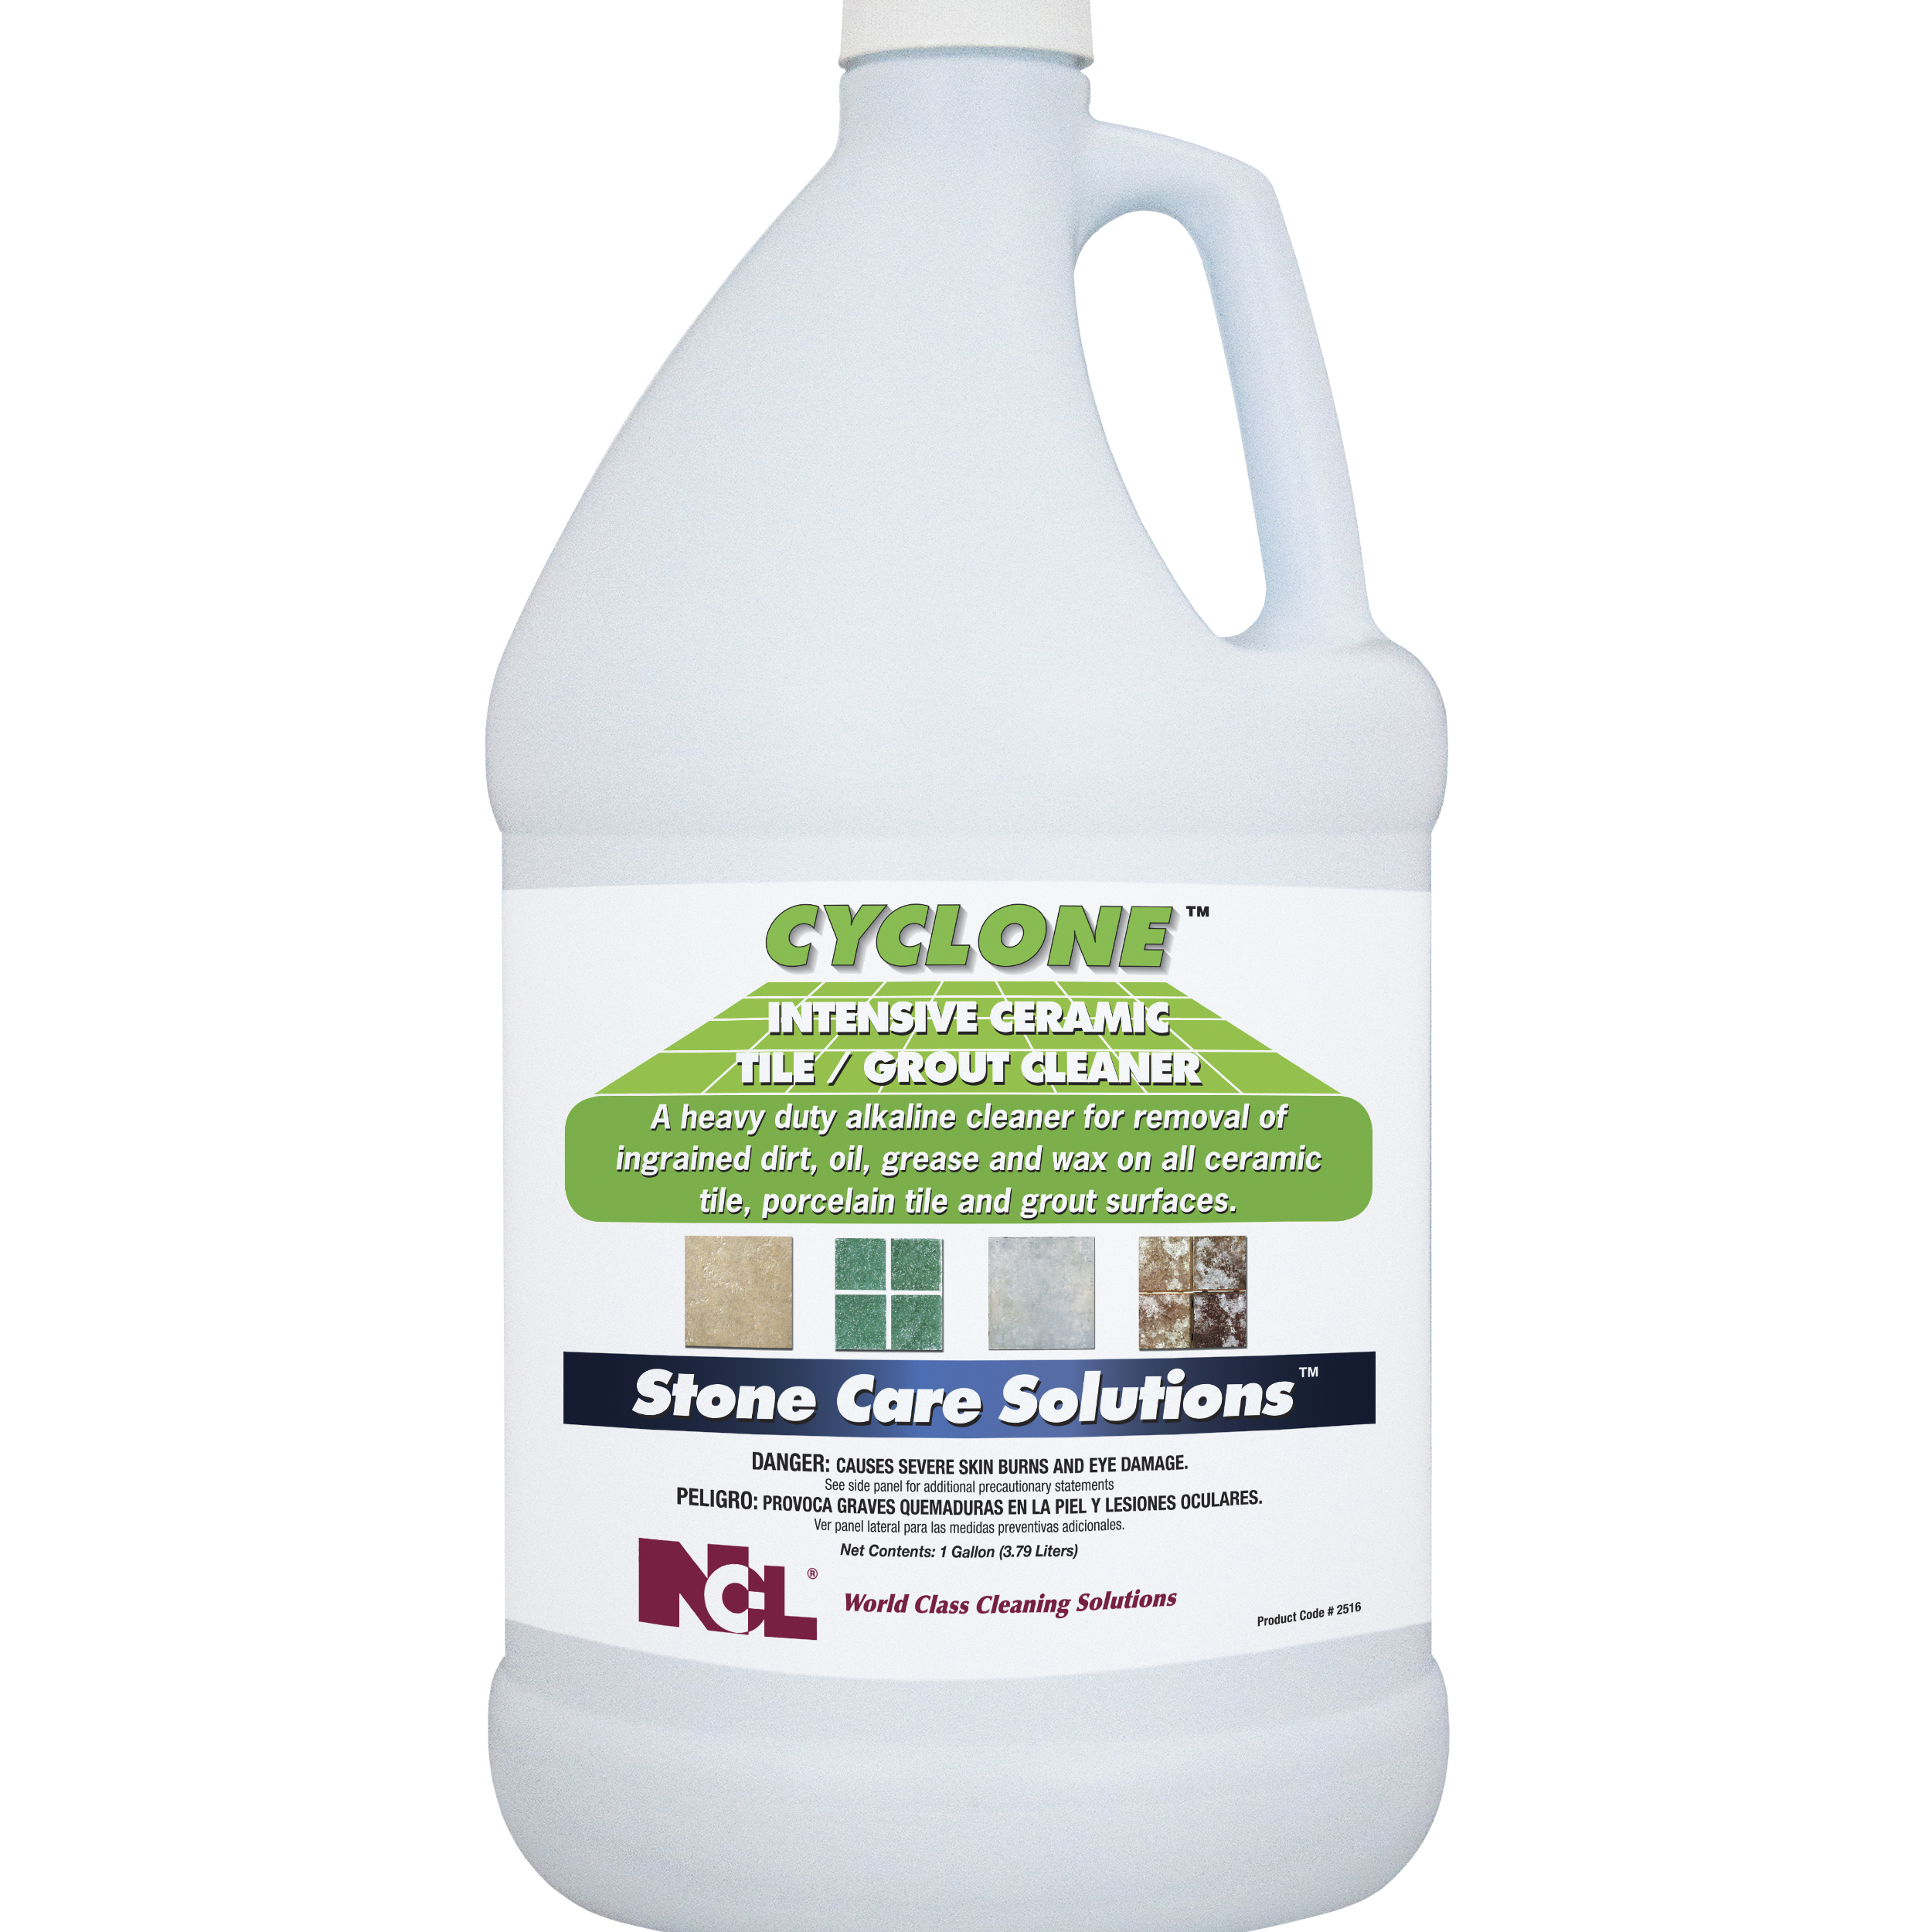  CYCLONE Intensive Ceramic Tile / Grout Cleaner 4/1 Gal. Case (NCL2516-29) 